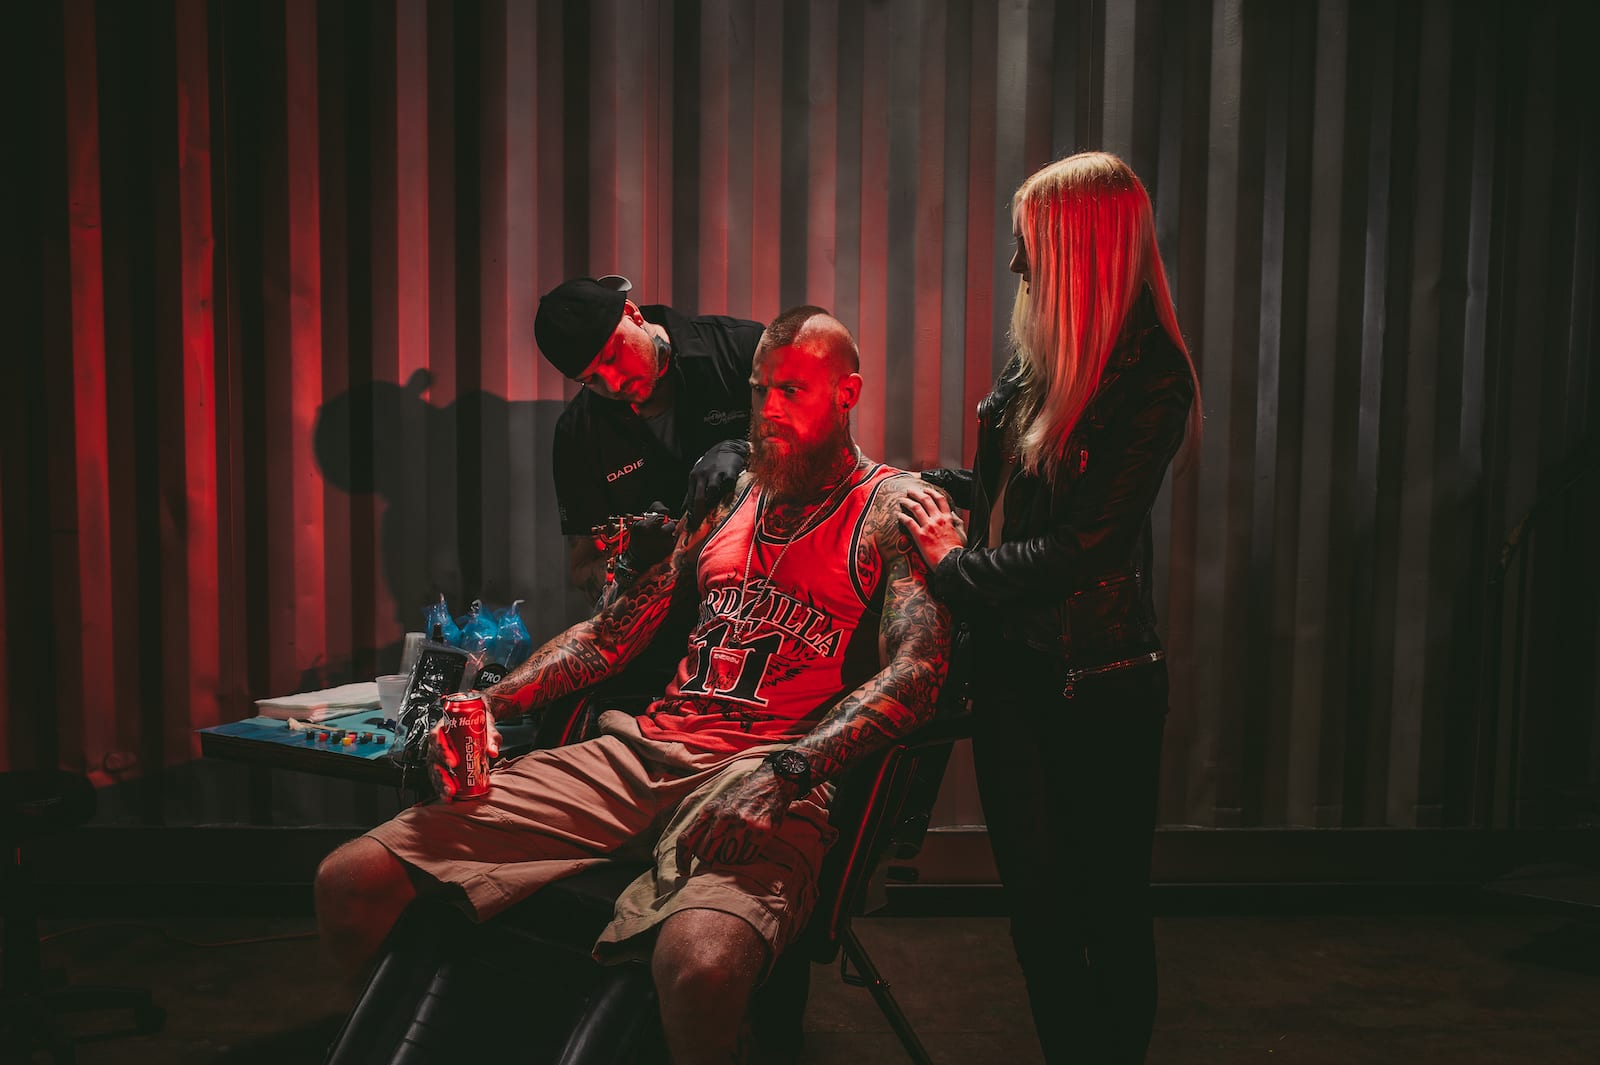 Bearded tattooed man holding Hard Rock Energy drinks with tattoo artist working on a tattoo with an assistant standing nearby